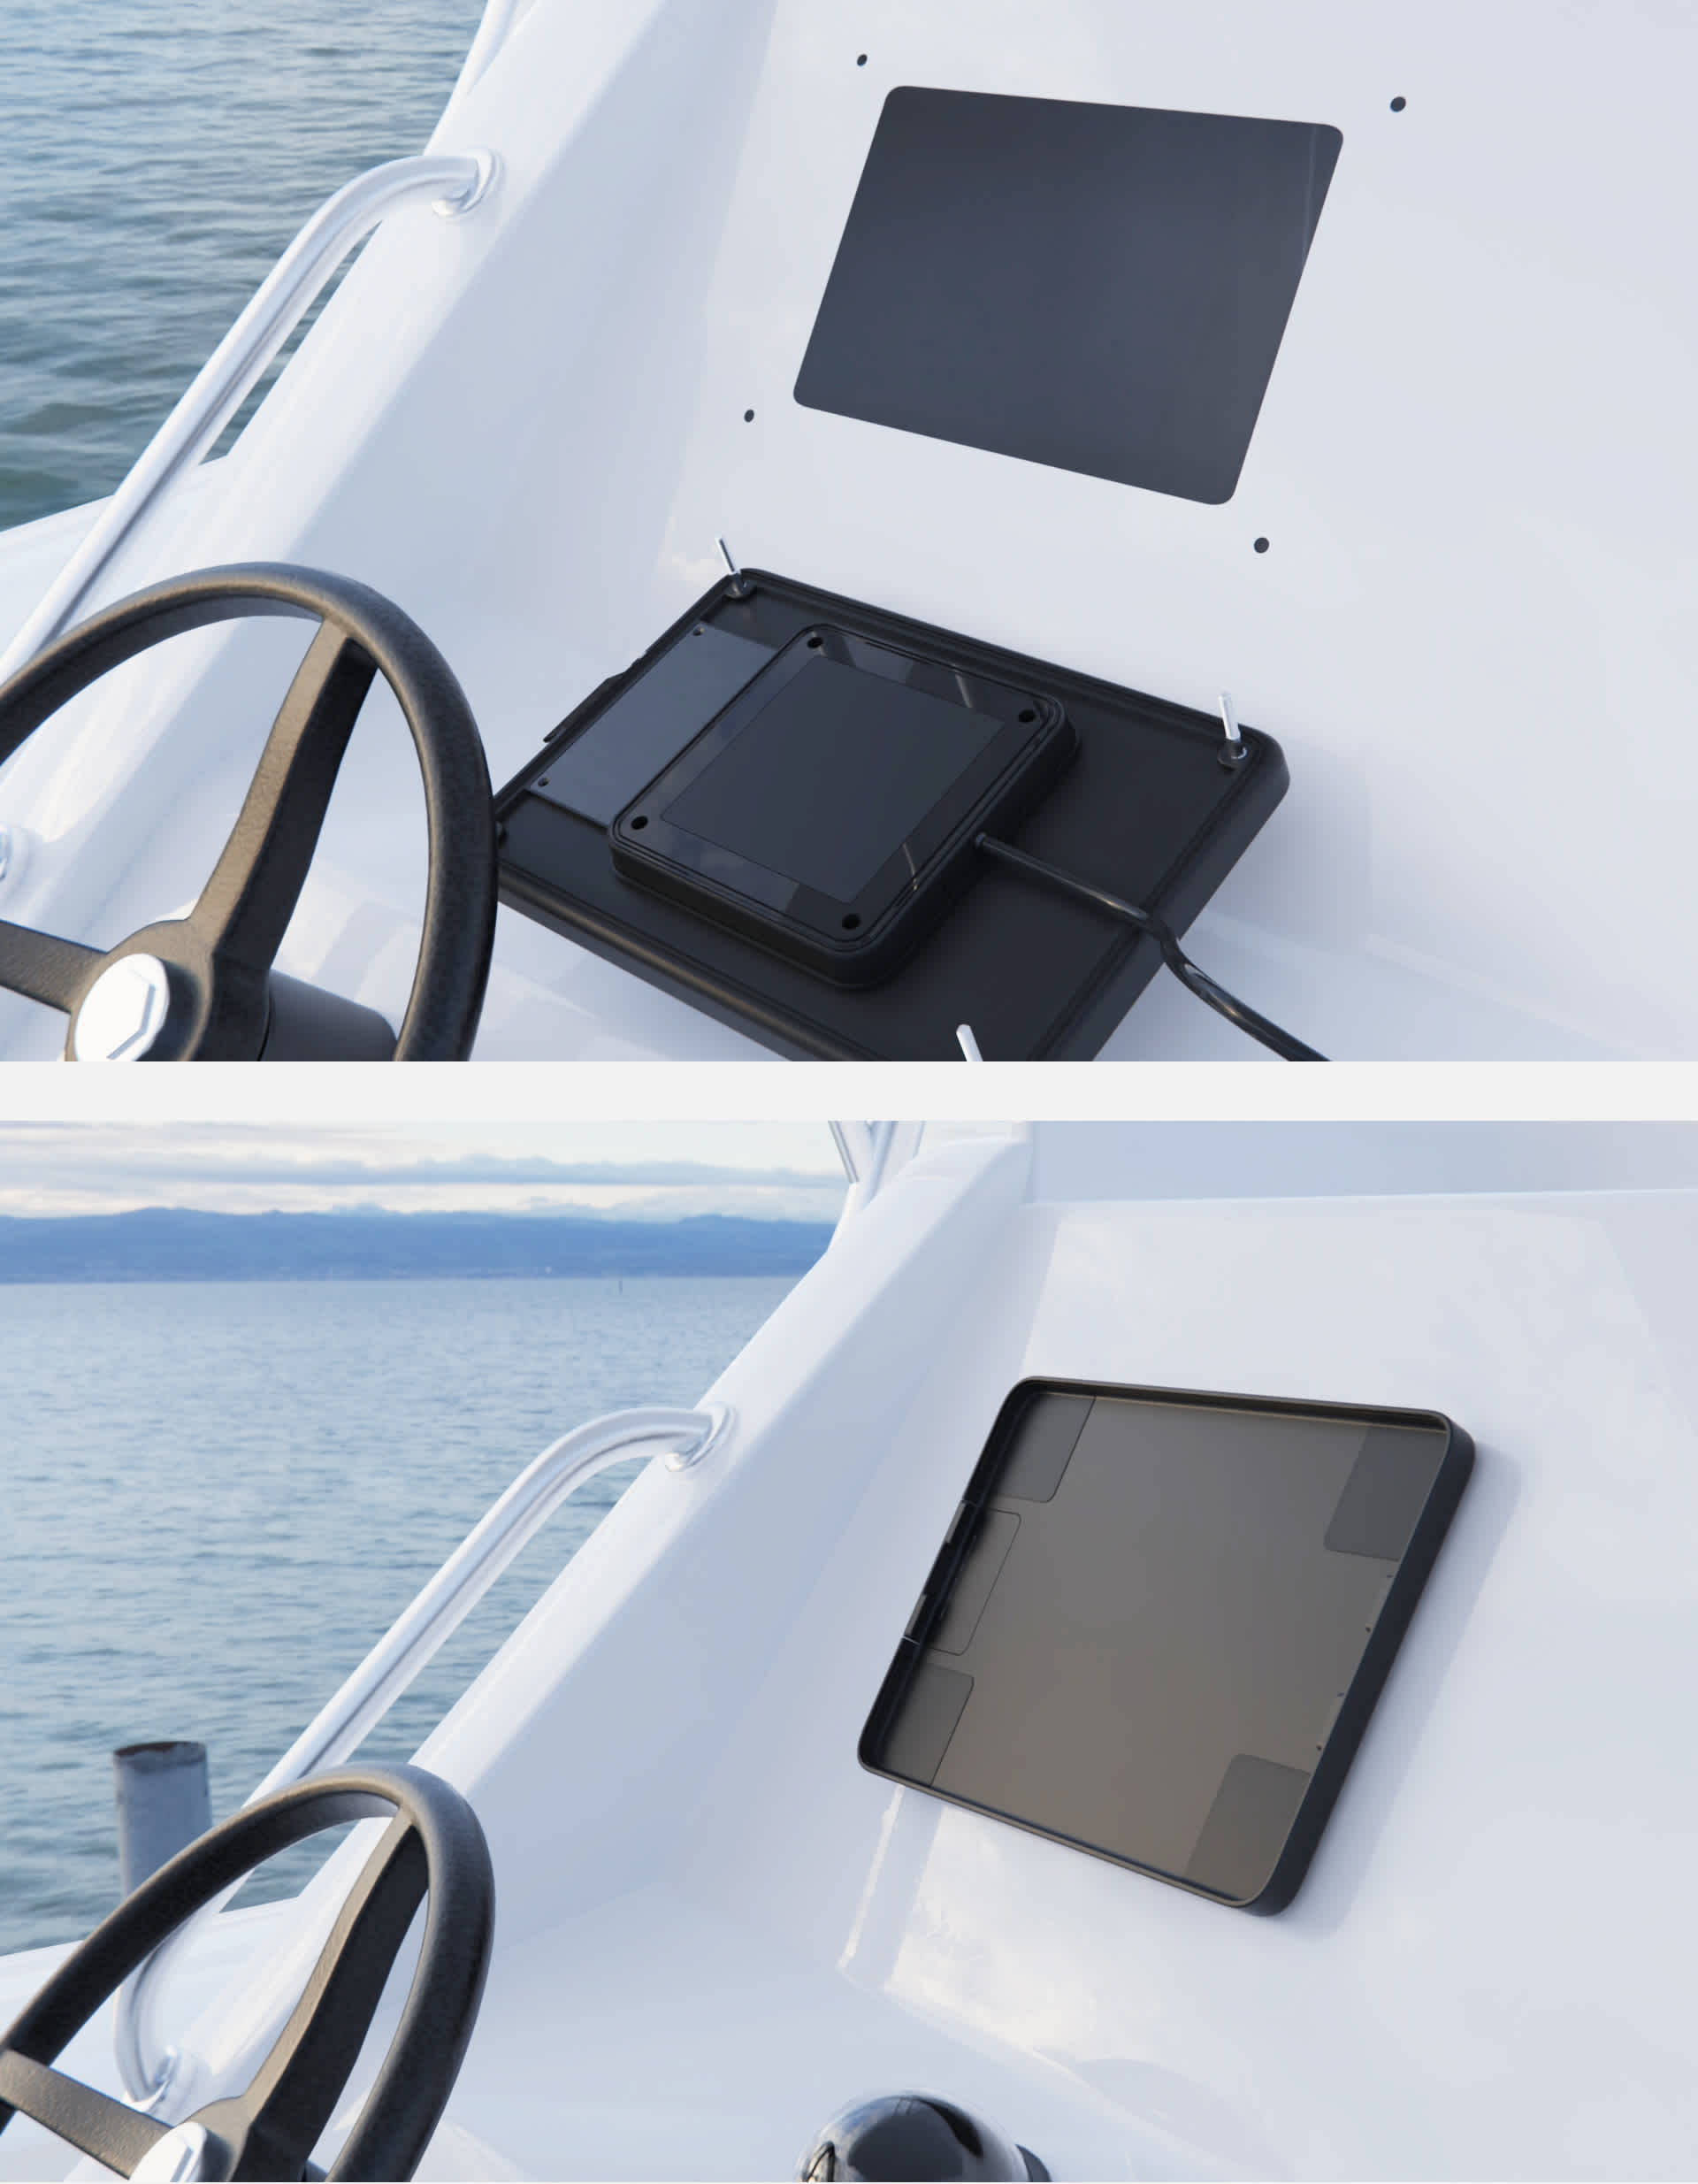 A step-by-step illustration of installing the Flush Charging Mount on top of an existing chartplotter cutout in the dashboard.